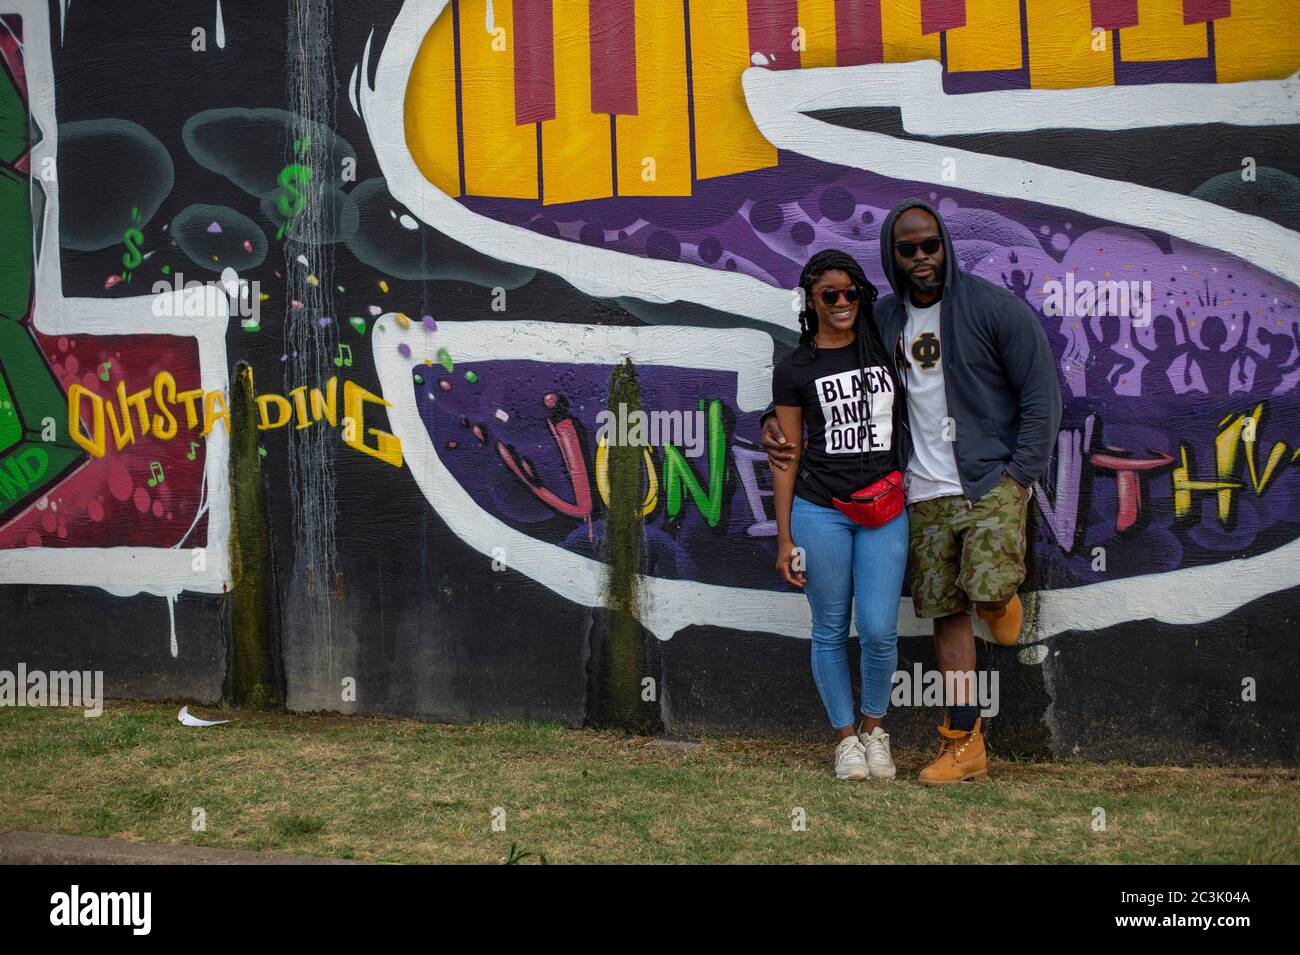 June 19 2020 Tulsa Oklahoma Usa Attendees Of The Annual Juneteenth Celebration Stand For A Picture In Front Of The Black Wall Street Mural On Friday People Attended The Juneteenth Celebration In